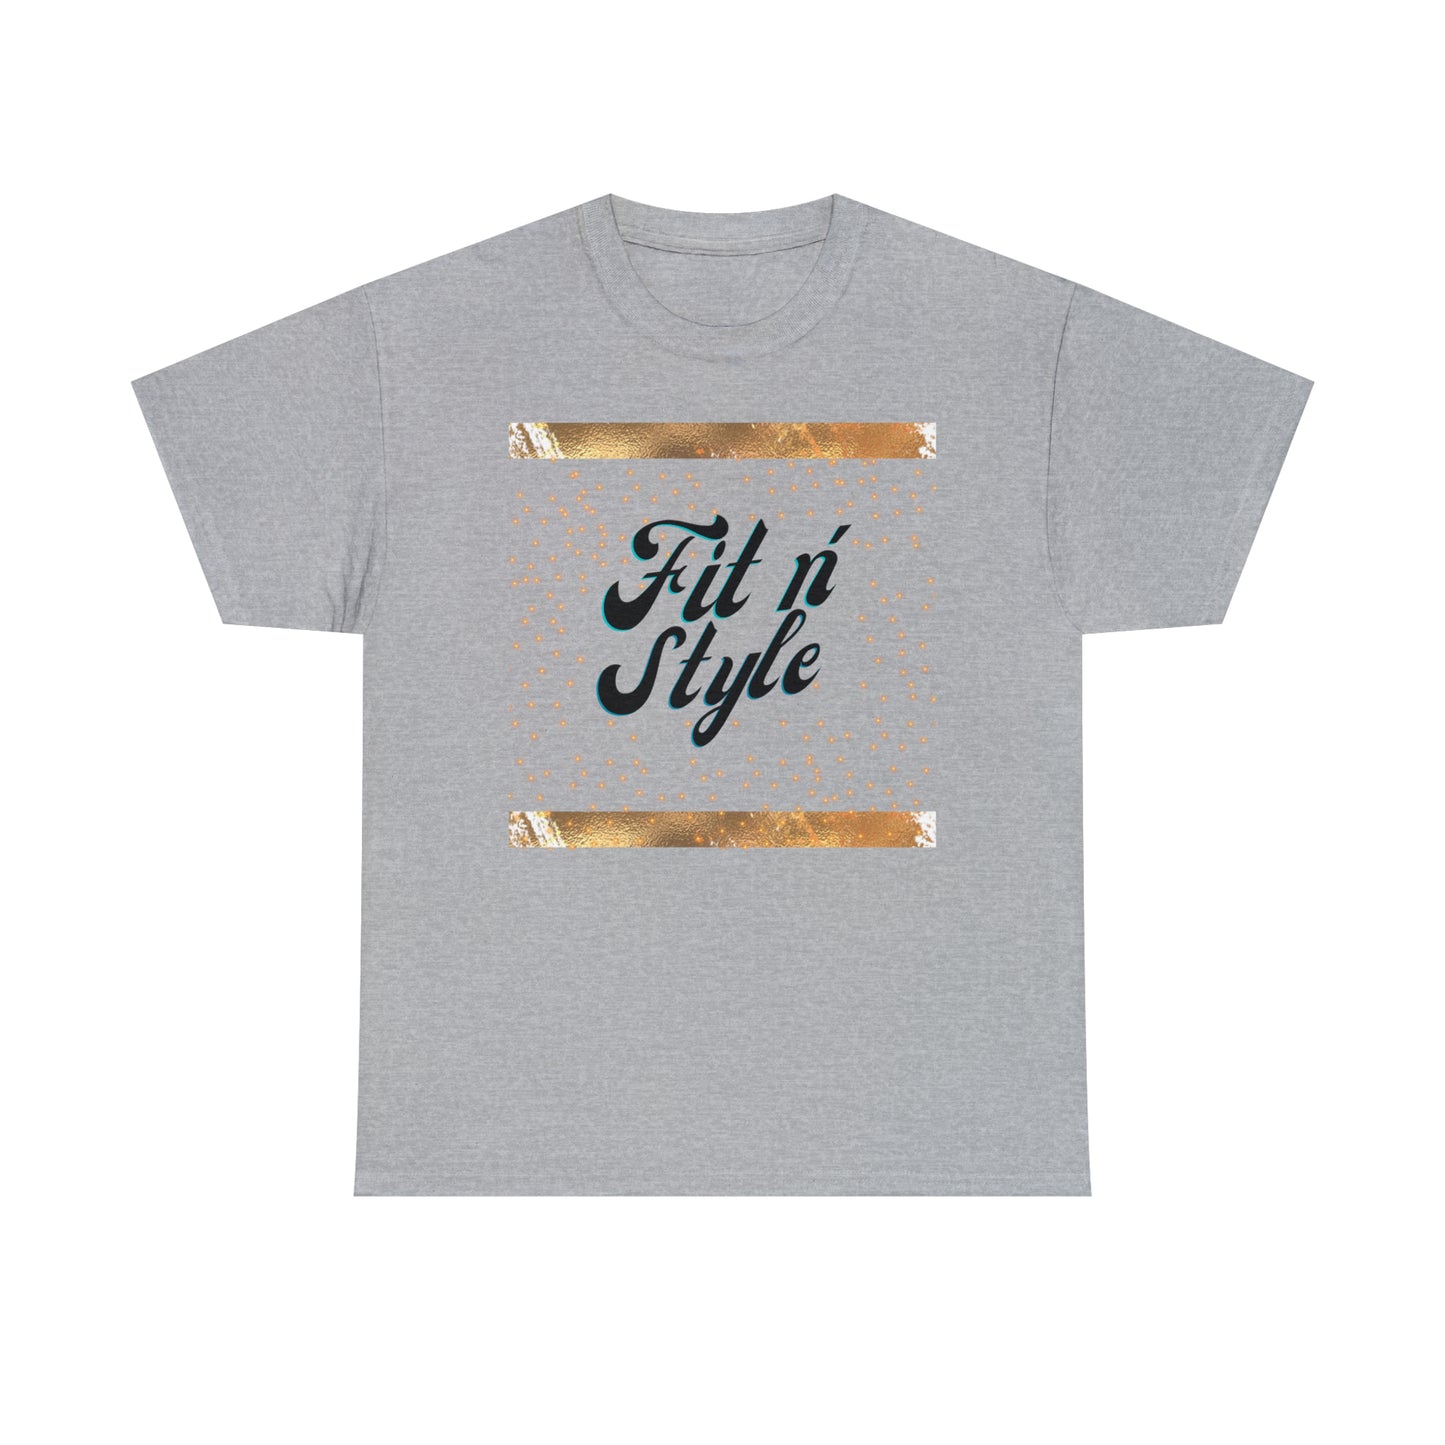 Heavy Cotton Tee 100% cotton, Classic fit Varies sizes. "Gold Collection:.